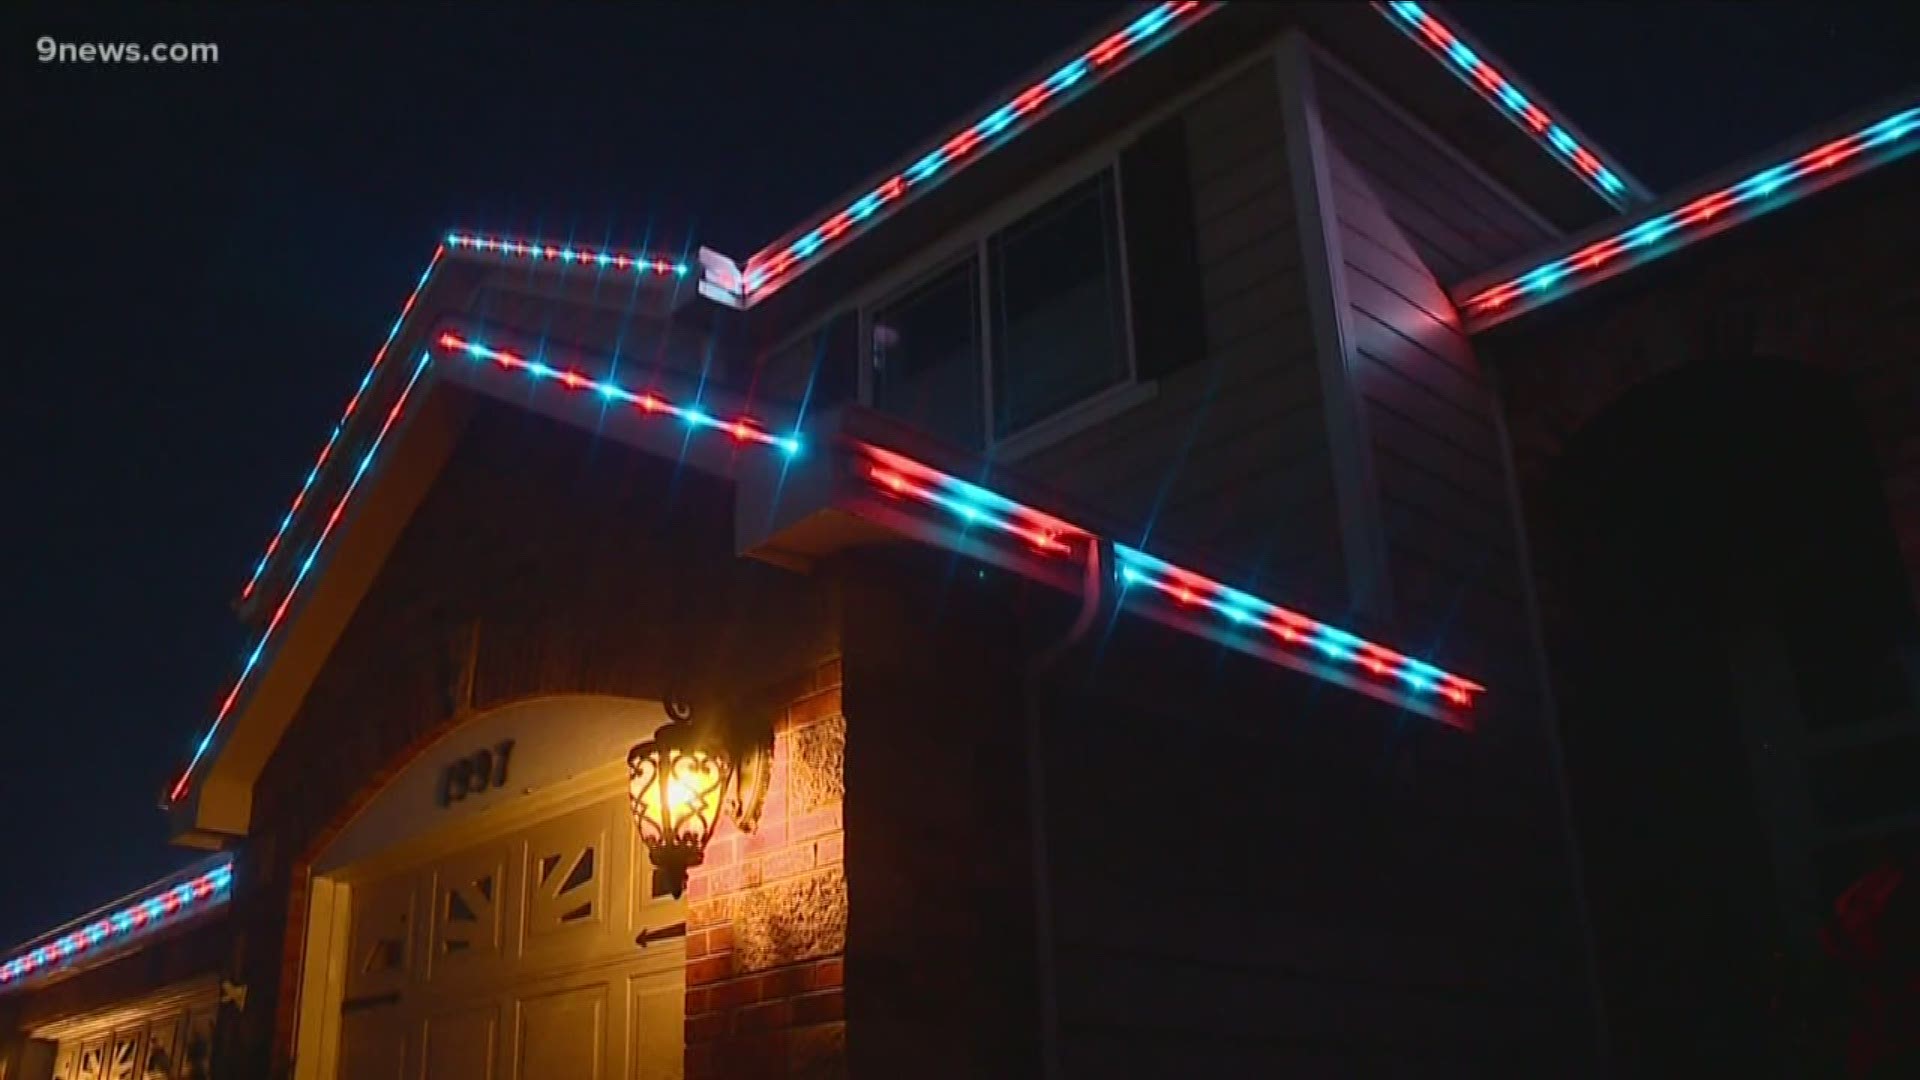 A Fort Collins company creates Christmas lights you can install and leave up year round.